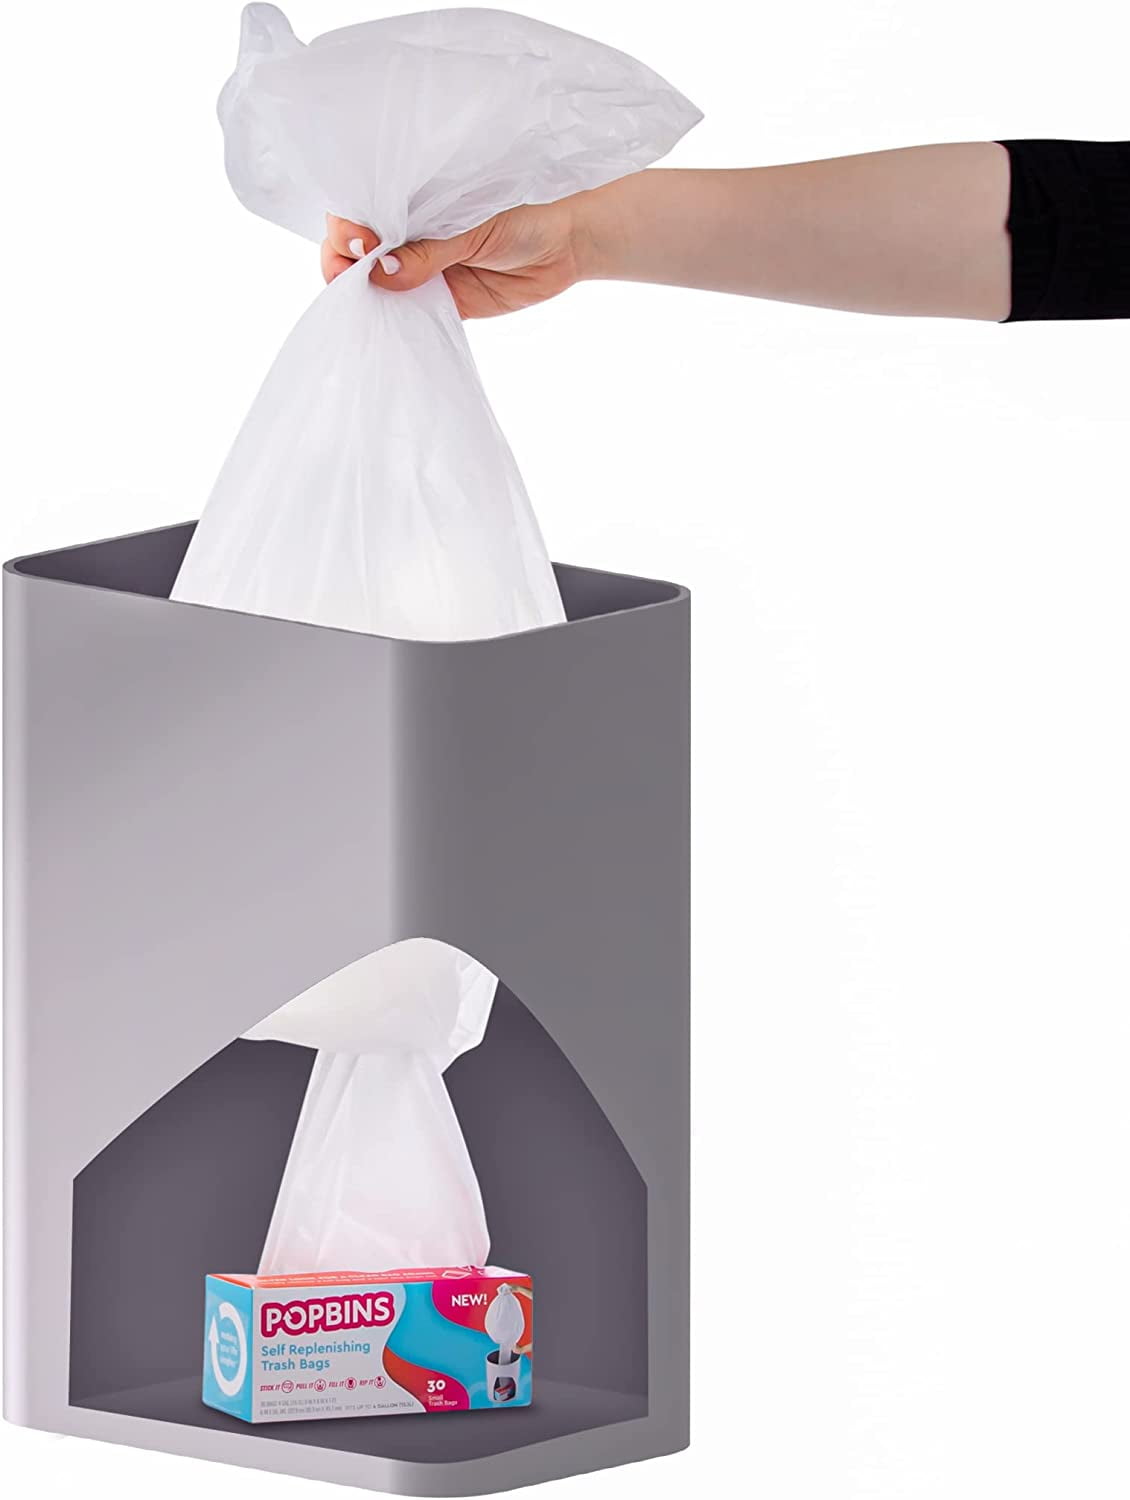 Popbins- Remove One Bag Another One Pops Right in - Clear 4 Gallon Trash Bag - 600 Count Easily Accessible Small Garbage Bags for Bathroom Trash Can